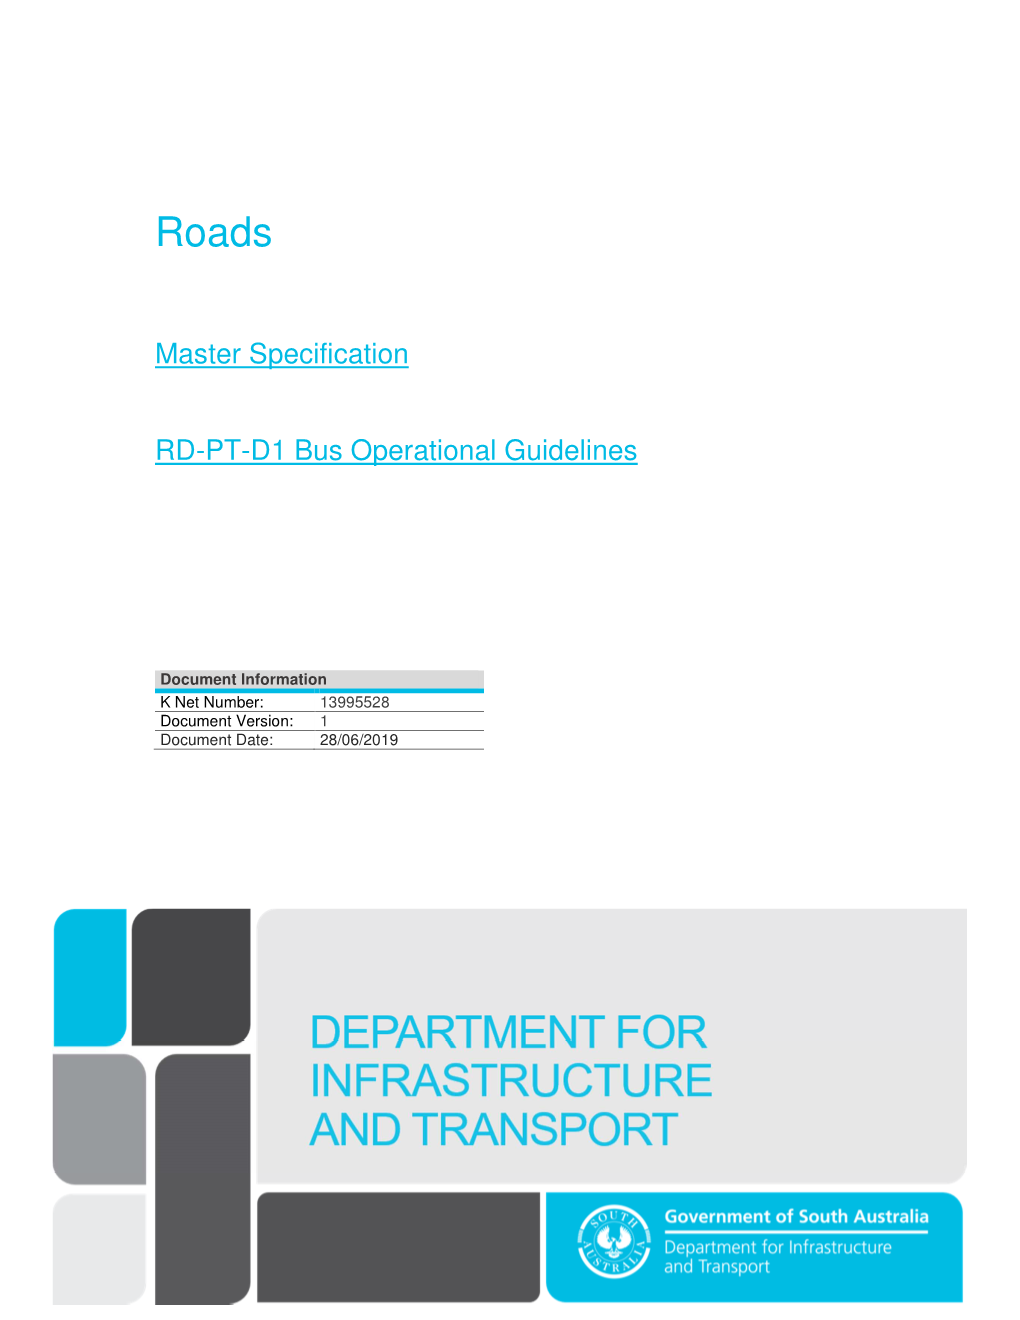 RD-PT-D1 Bus Operational Guidelines